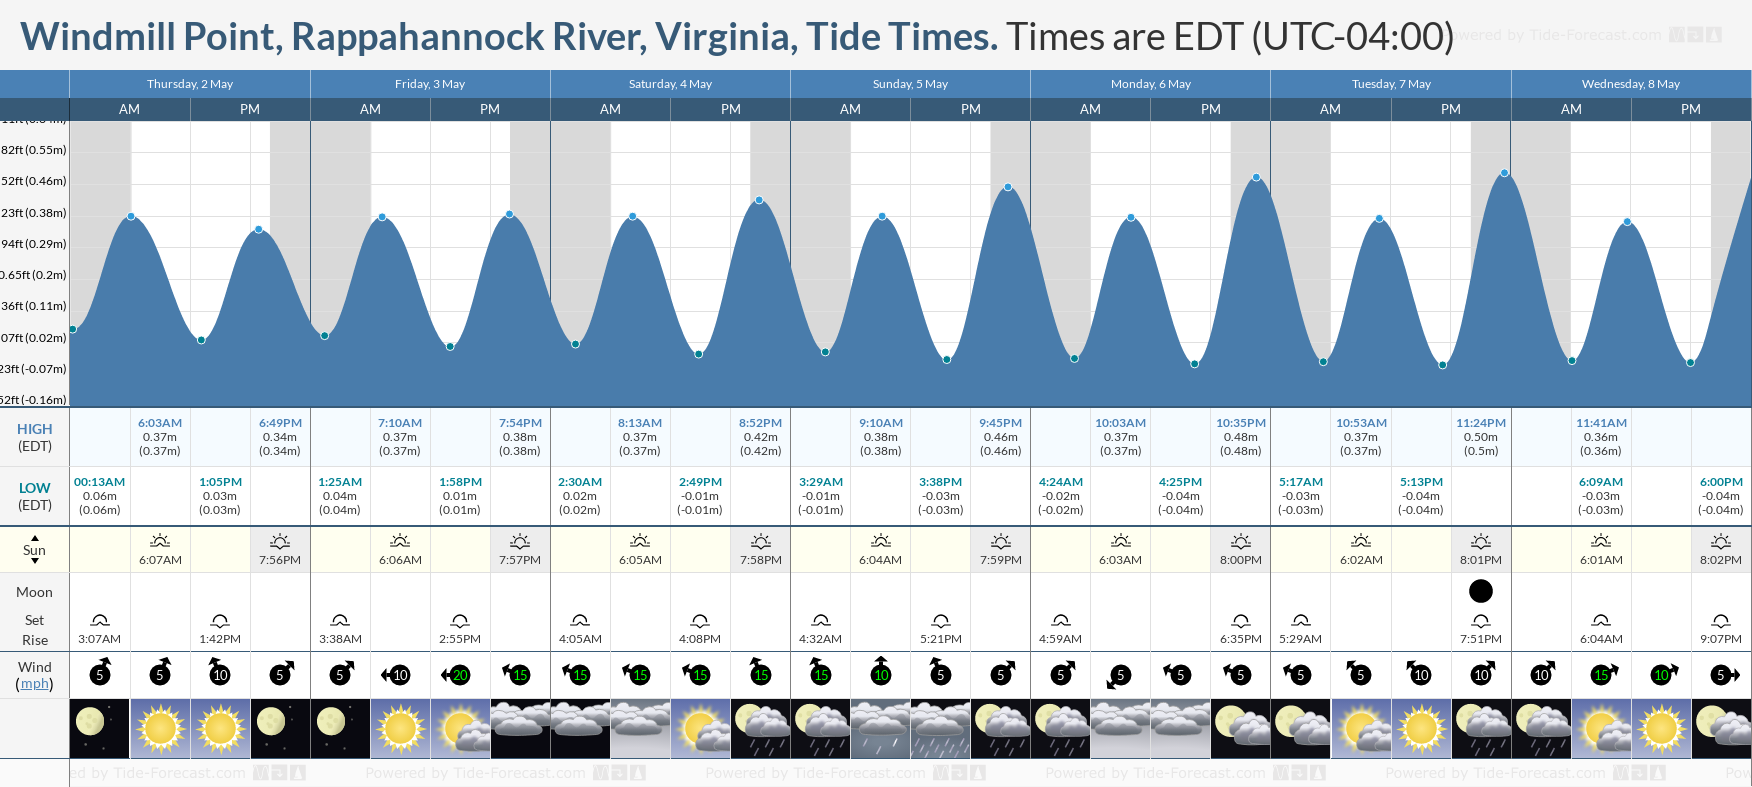 Windmill Point, Rappahannock River, Virginia Tide Chart including high and low tide tide times for the next 7 days